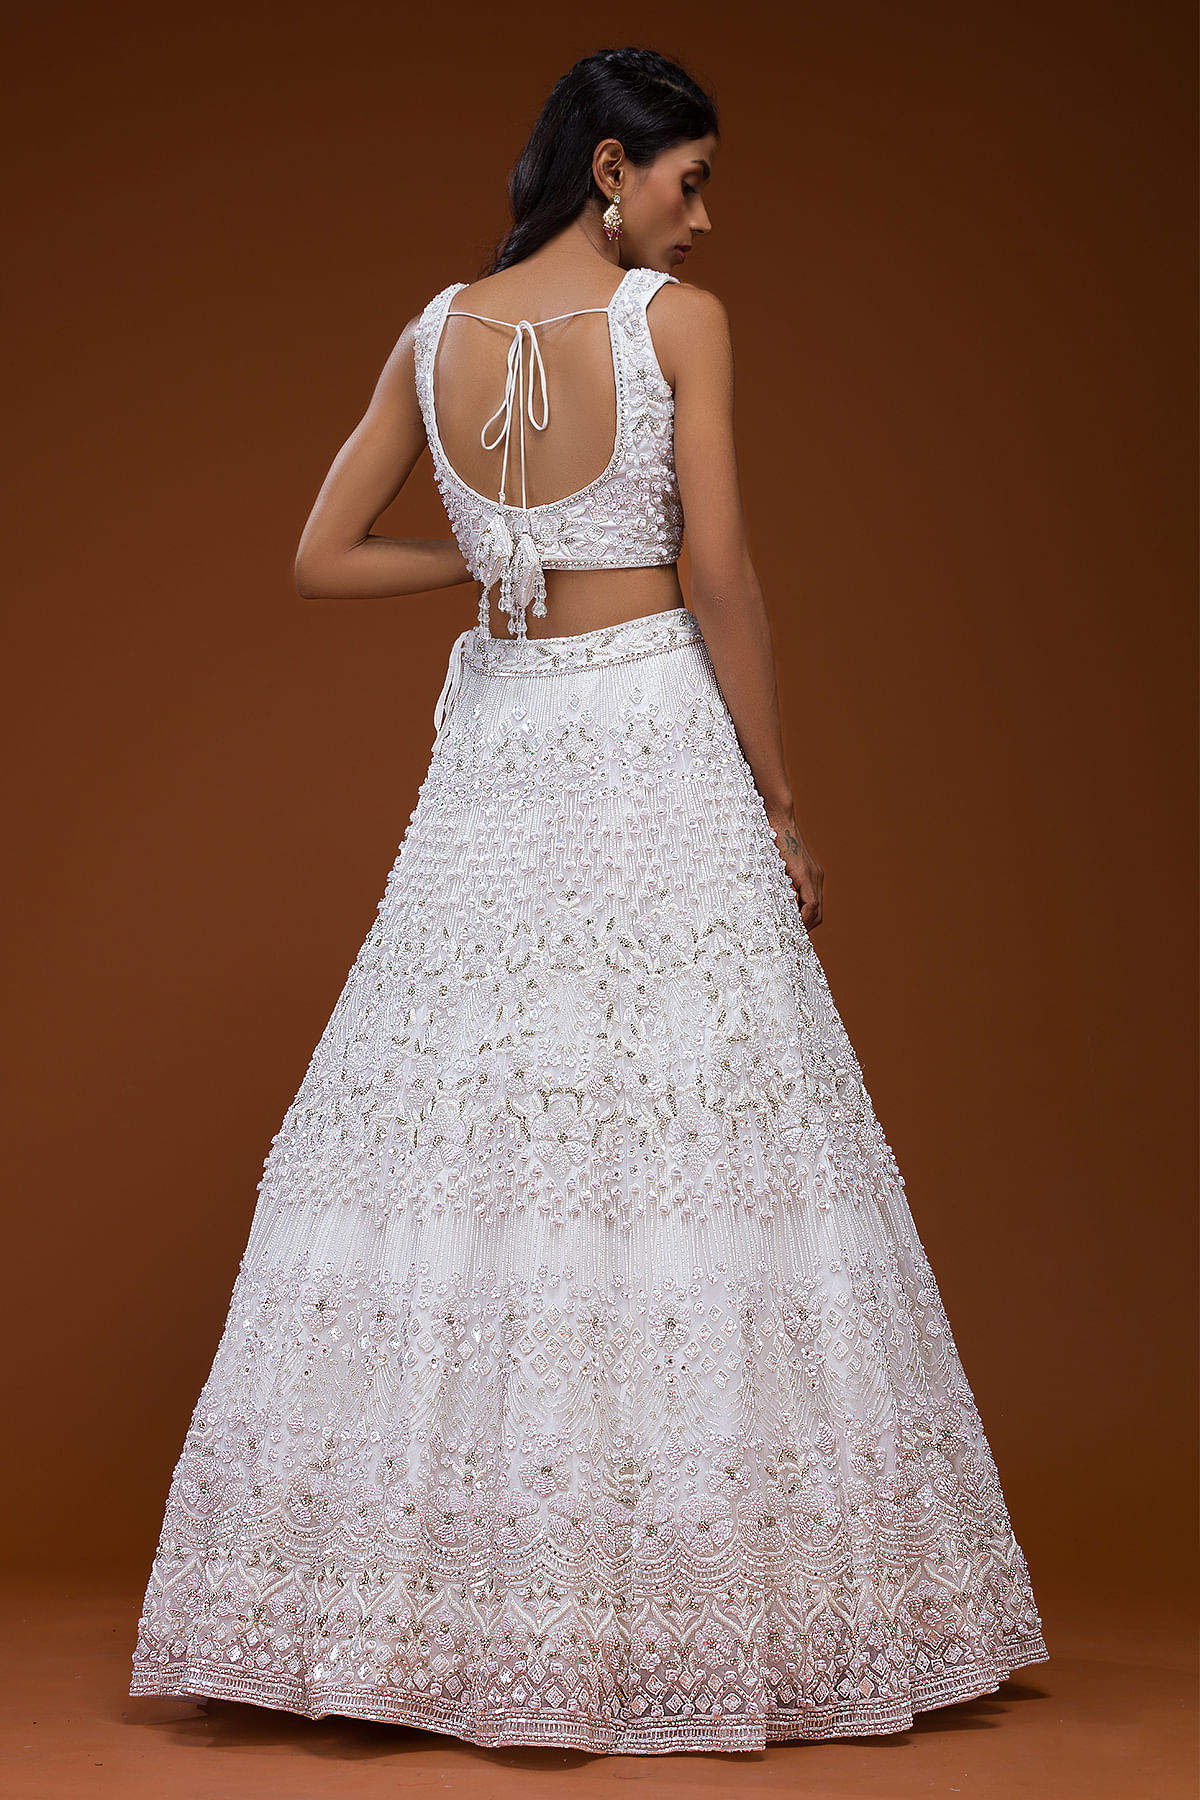 Buy White Chanderi Round Embroidered Crop Top For Women by Chandrima Online  at Aza Fashions. | Embroidered crop tops, Fashion, Tiered maxi dress